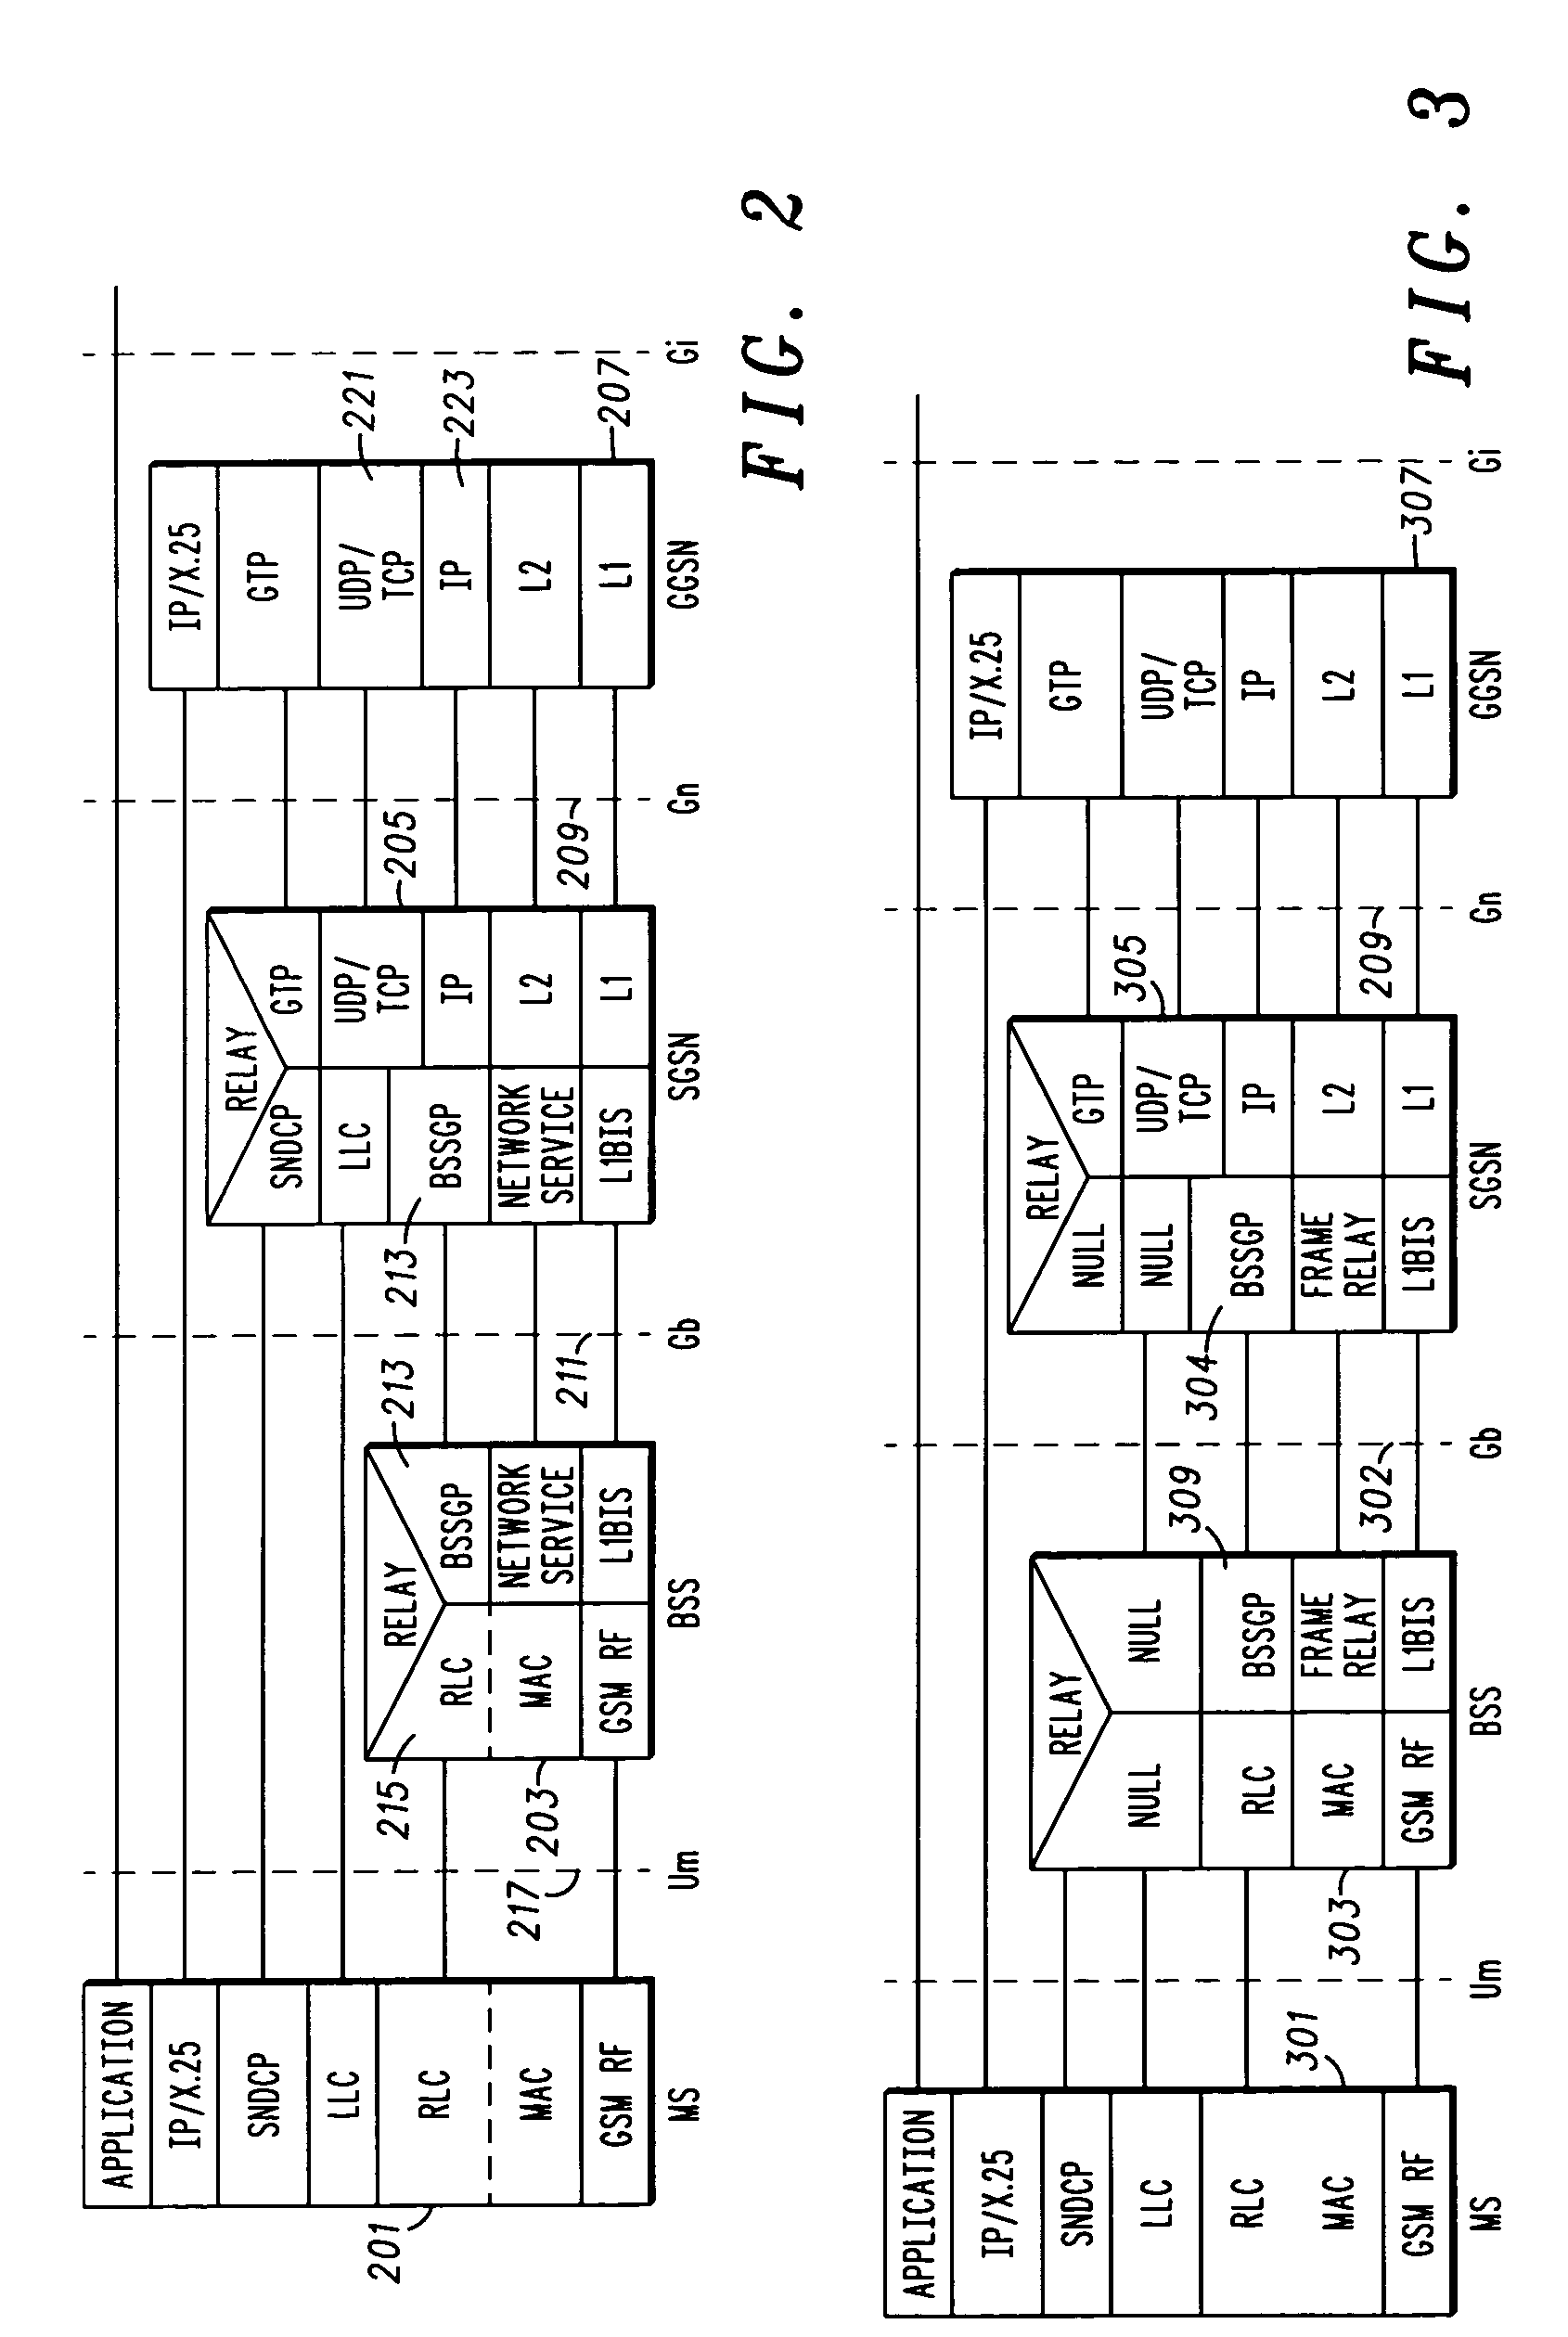 Method for routing data in a communication system